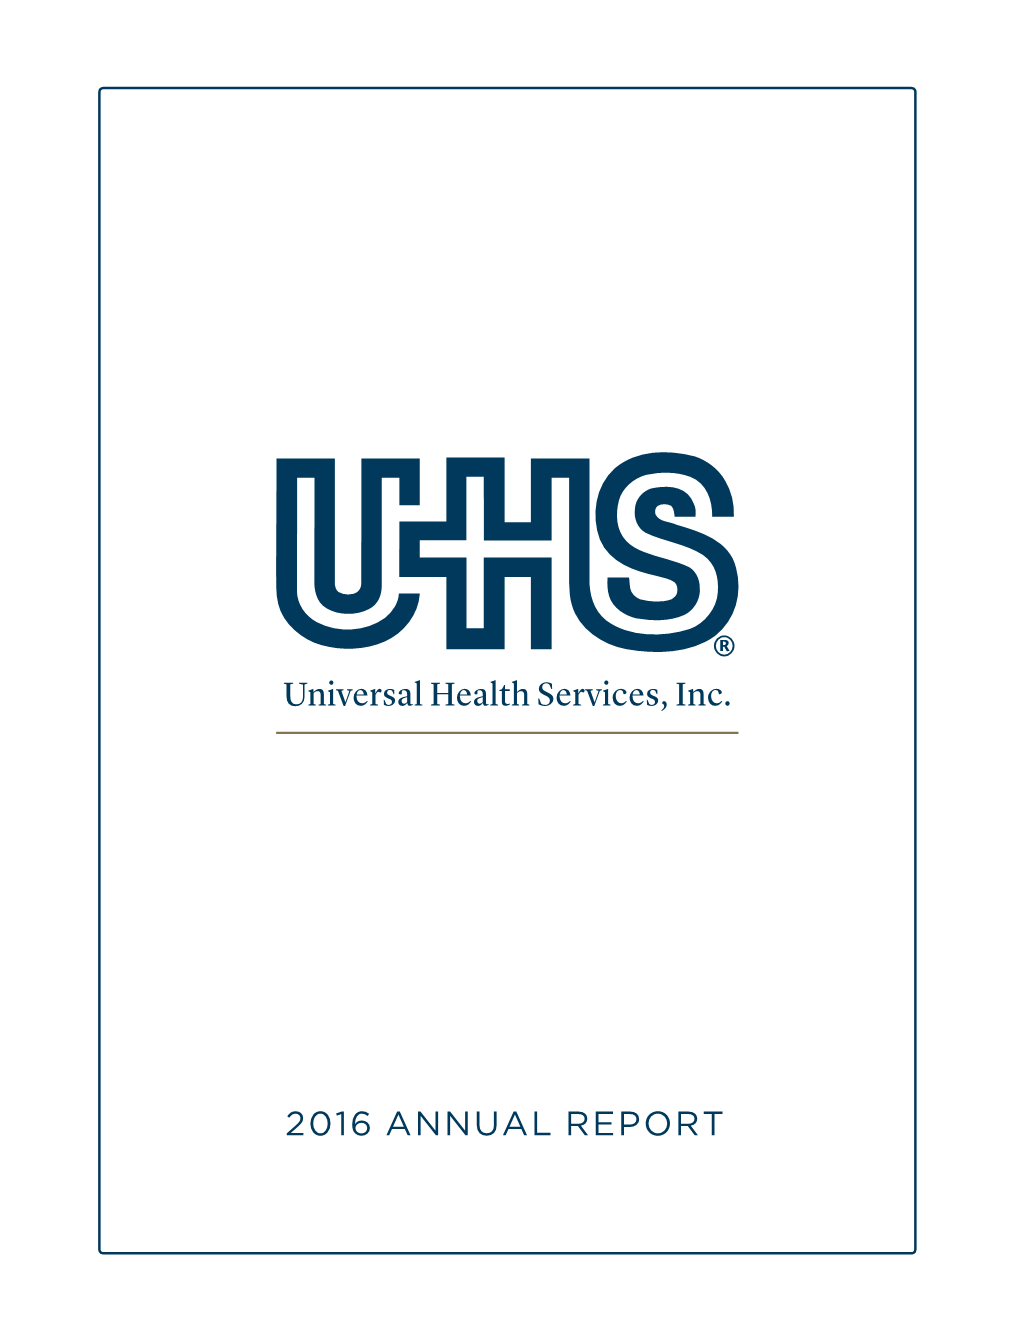 Universal Health Services, Inc. 2016 Annual Report